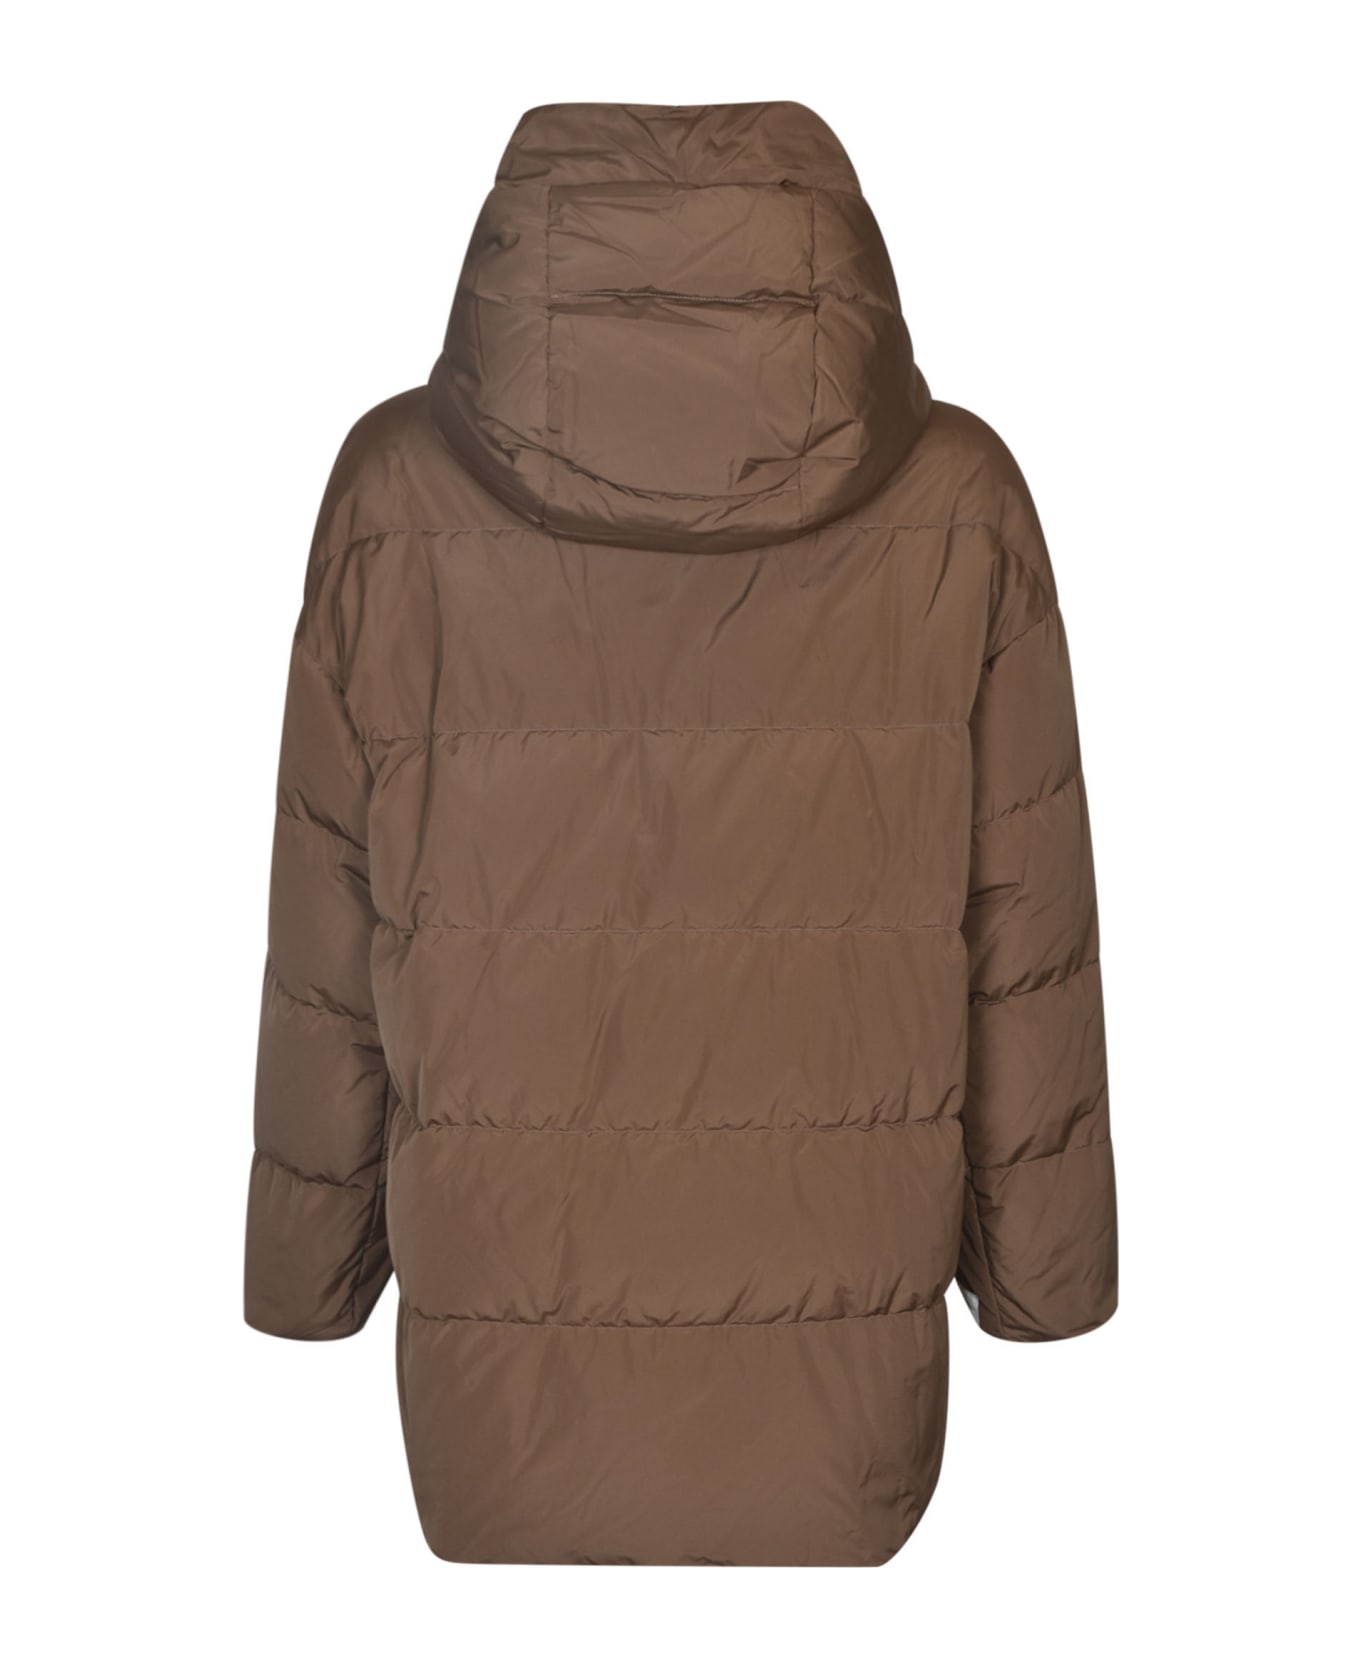 Max Mara Reversible Quilted Nylon Down Jacket - Cammello